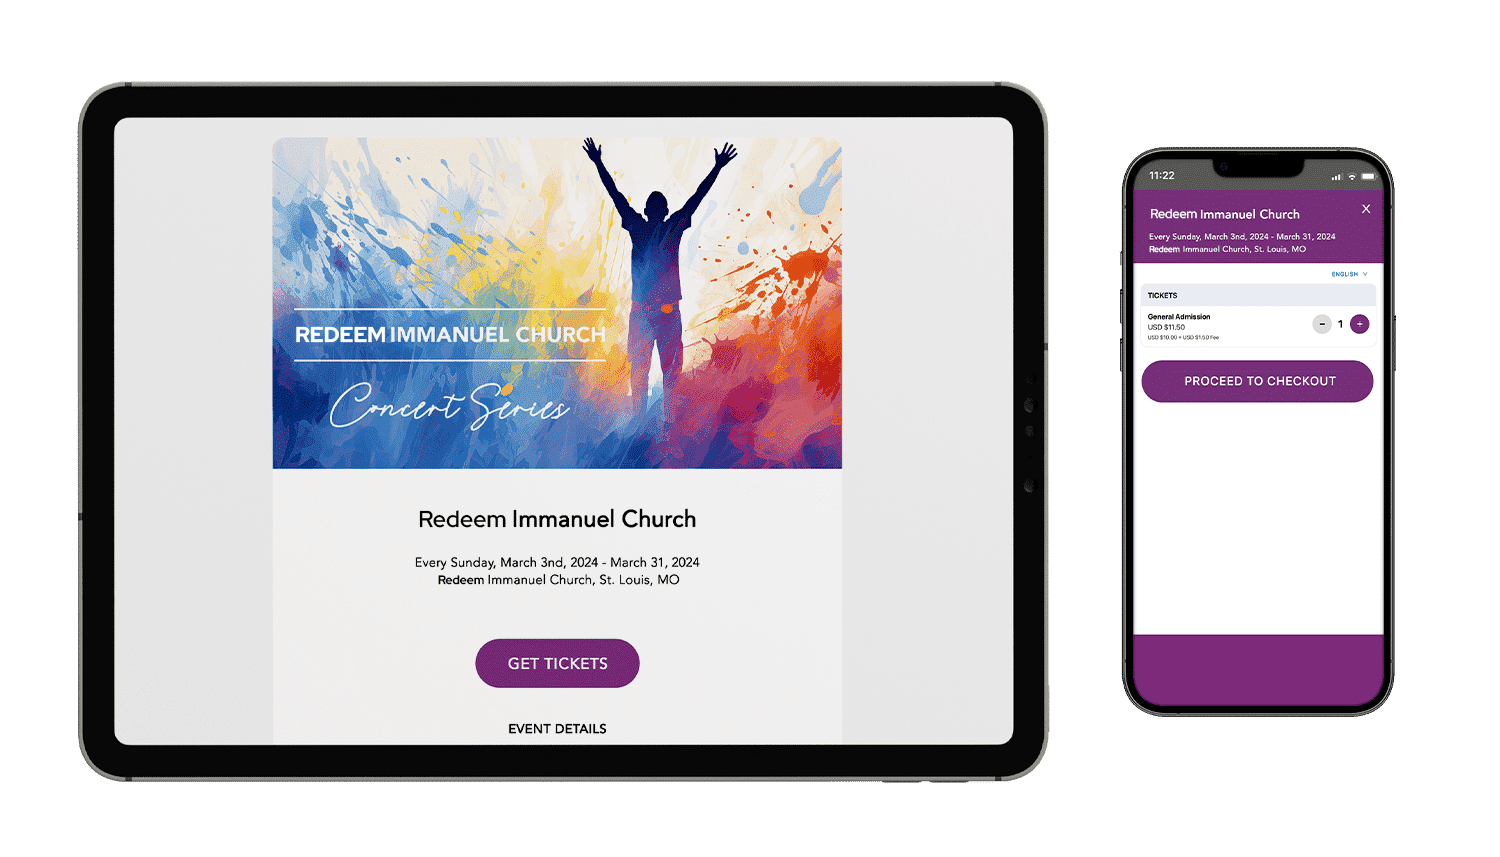 ticketing page example to sell event tickets to a church